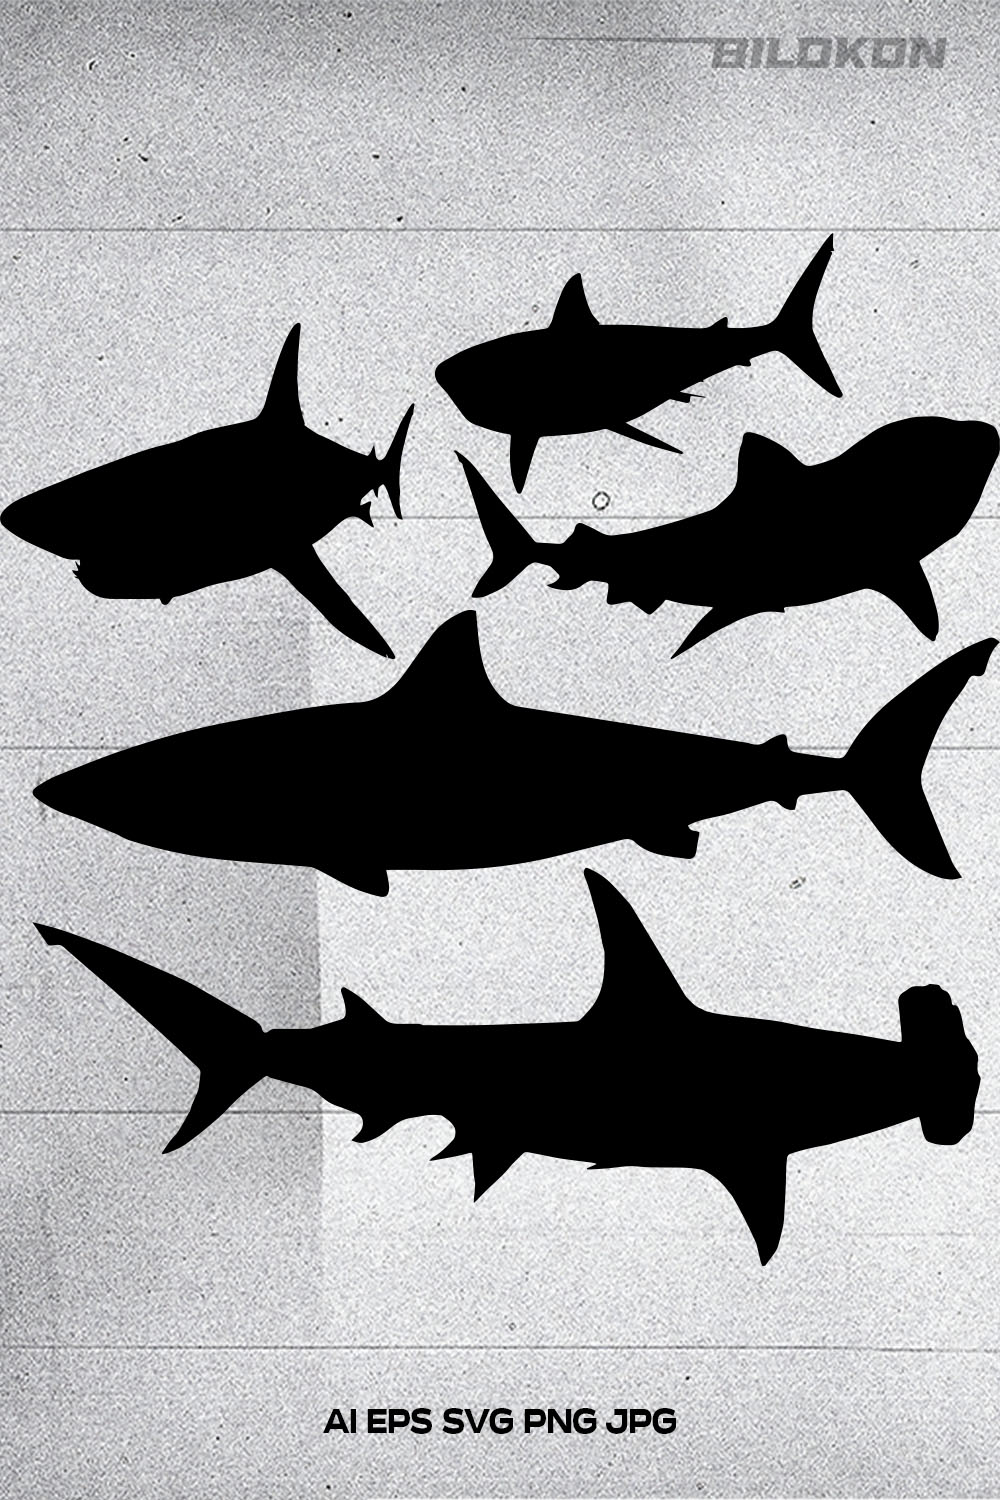 Group of shark silhouettes against a white background.